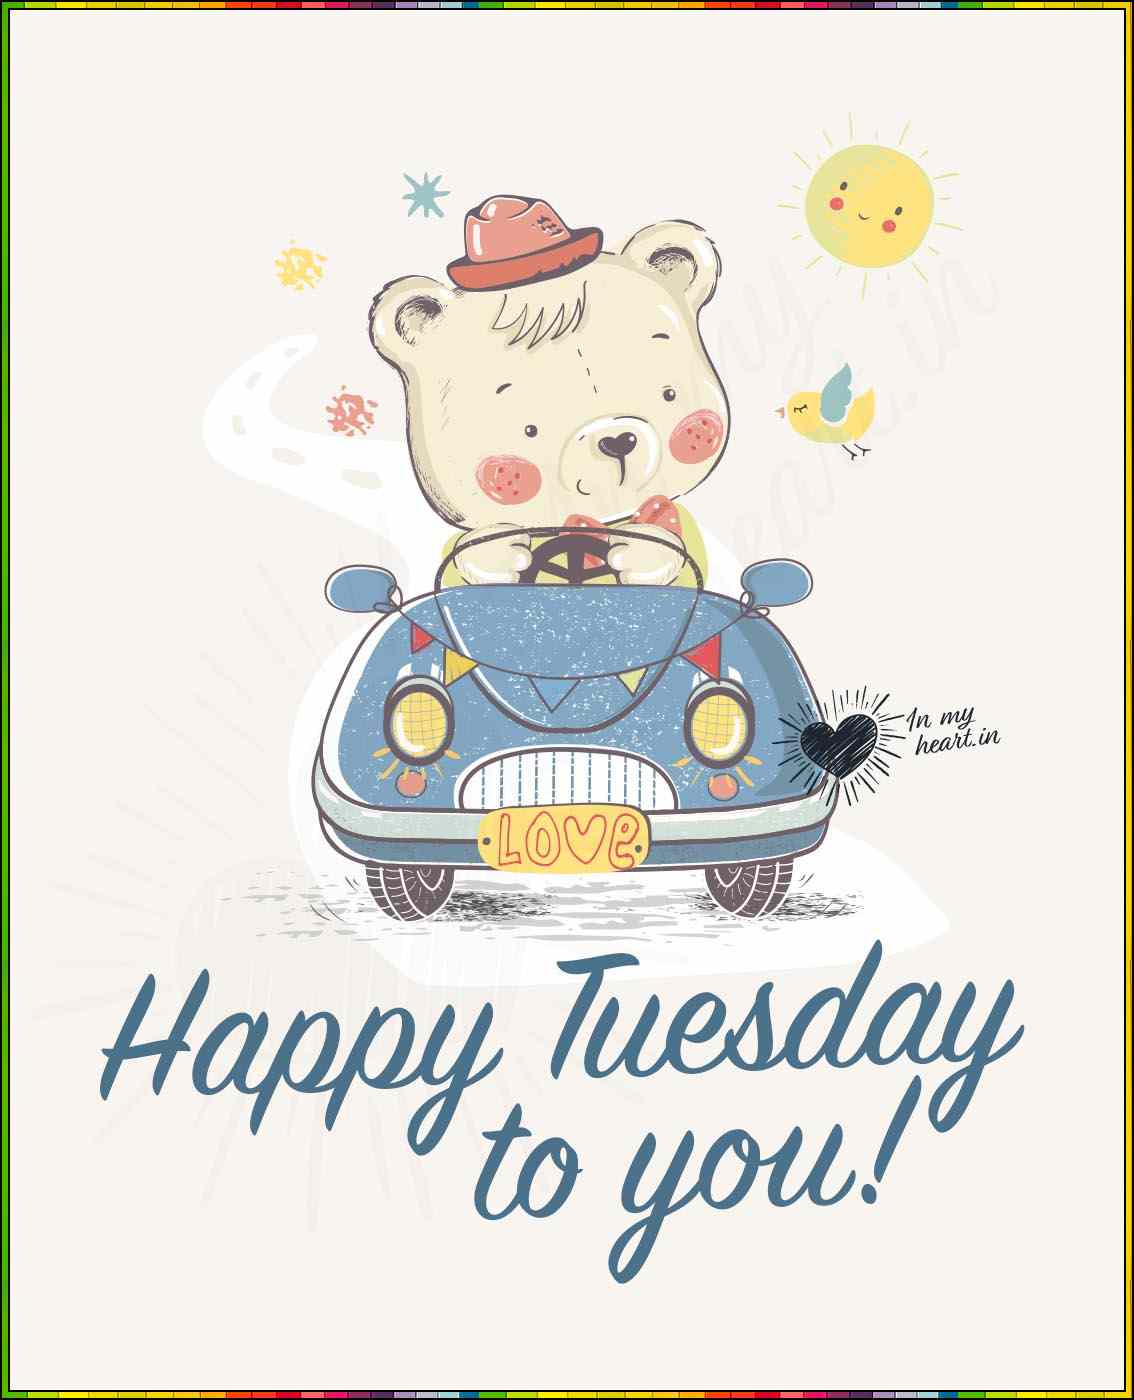 images of happy tuesday
